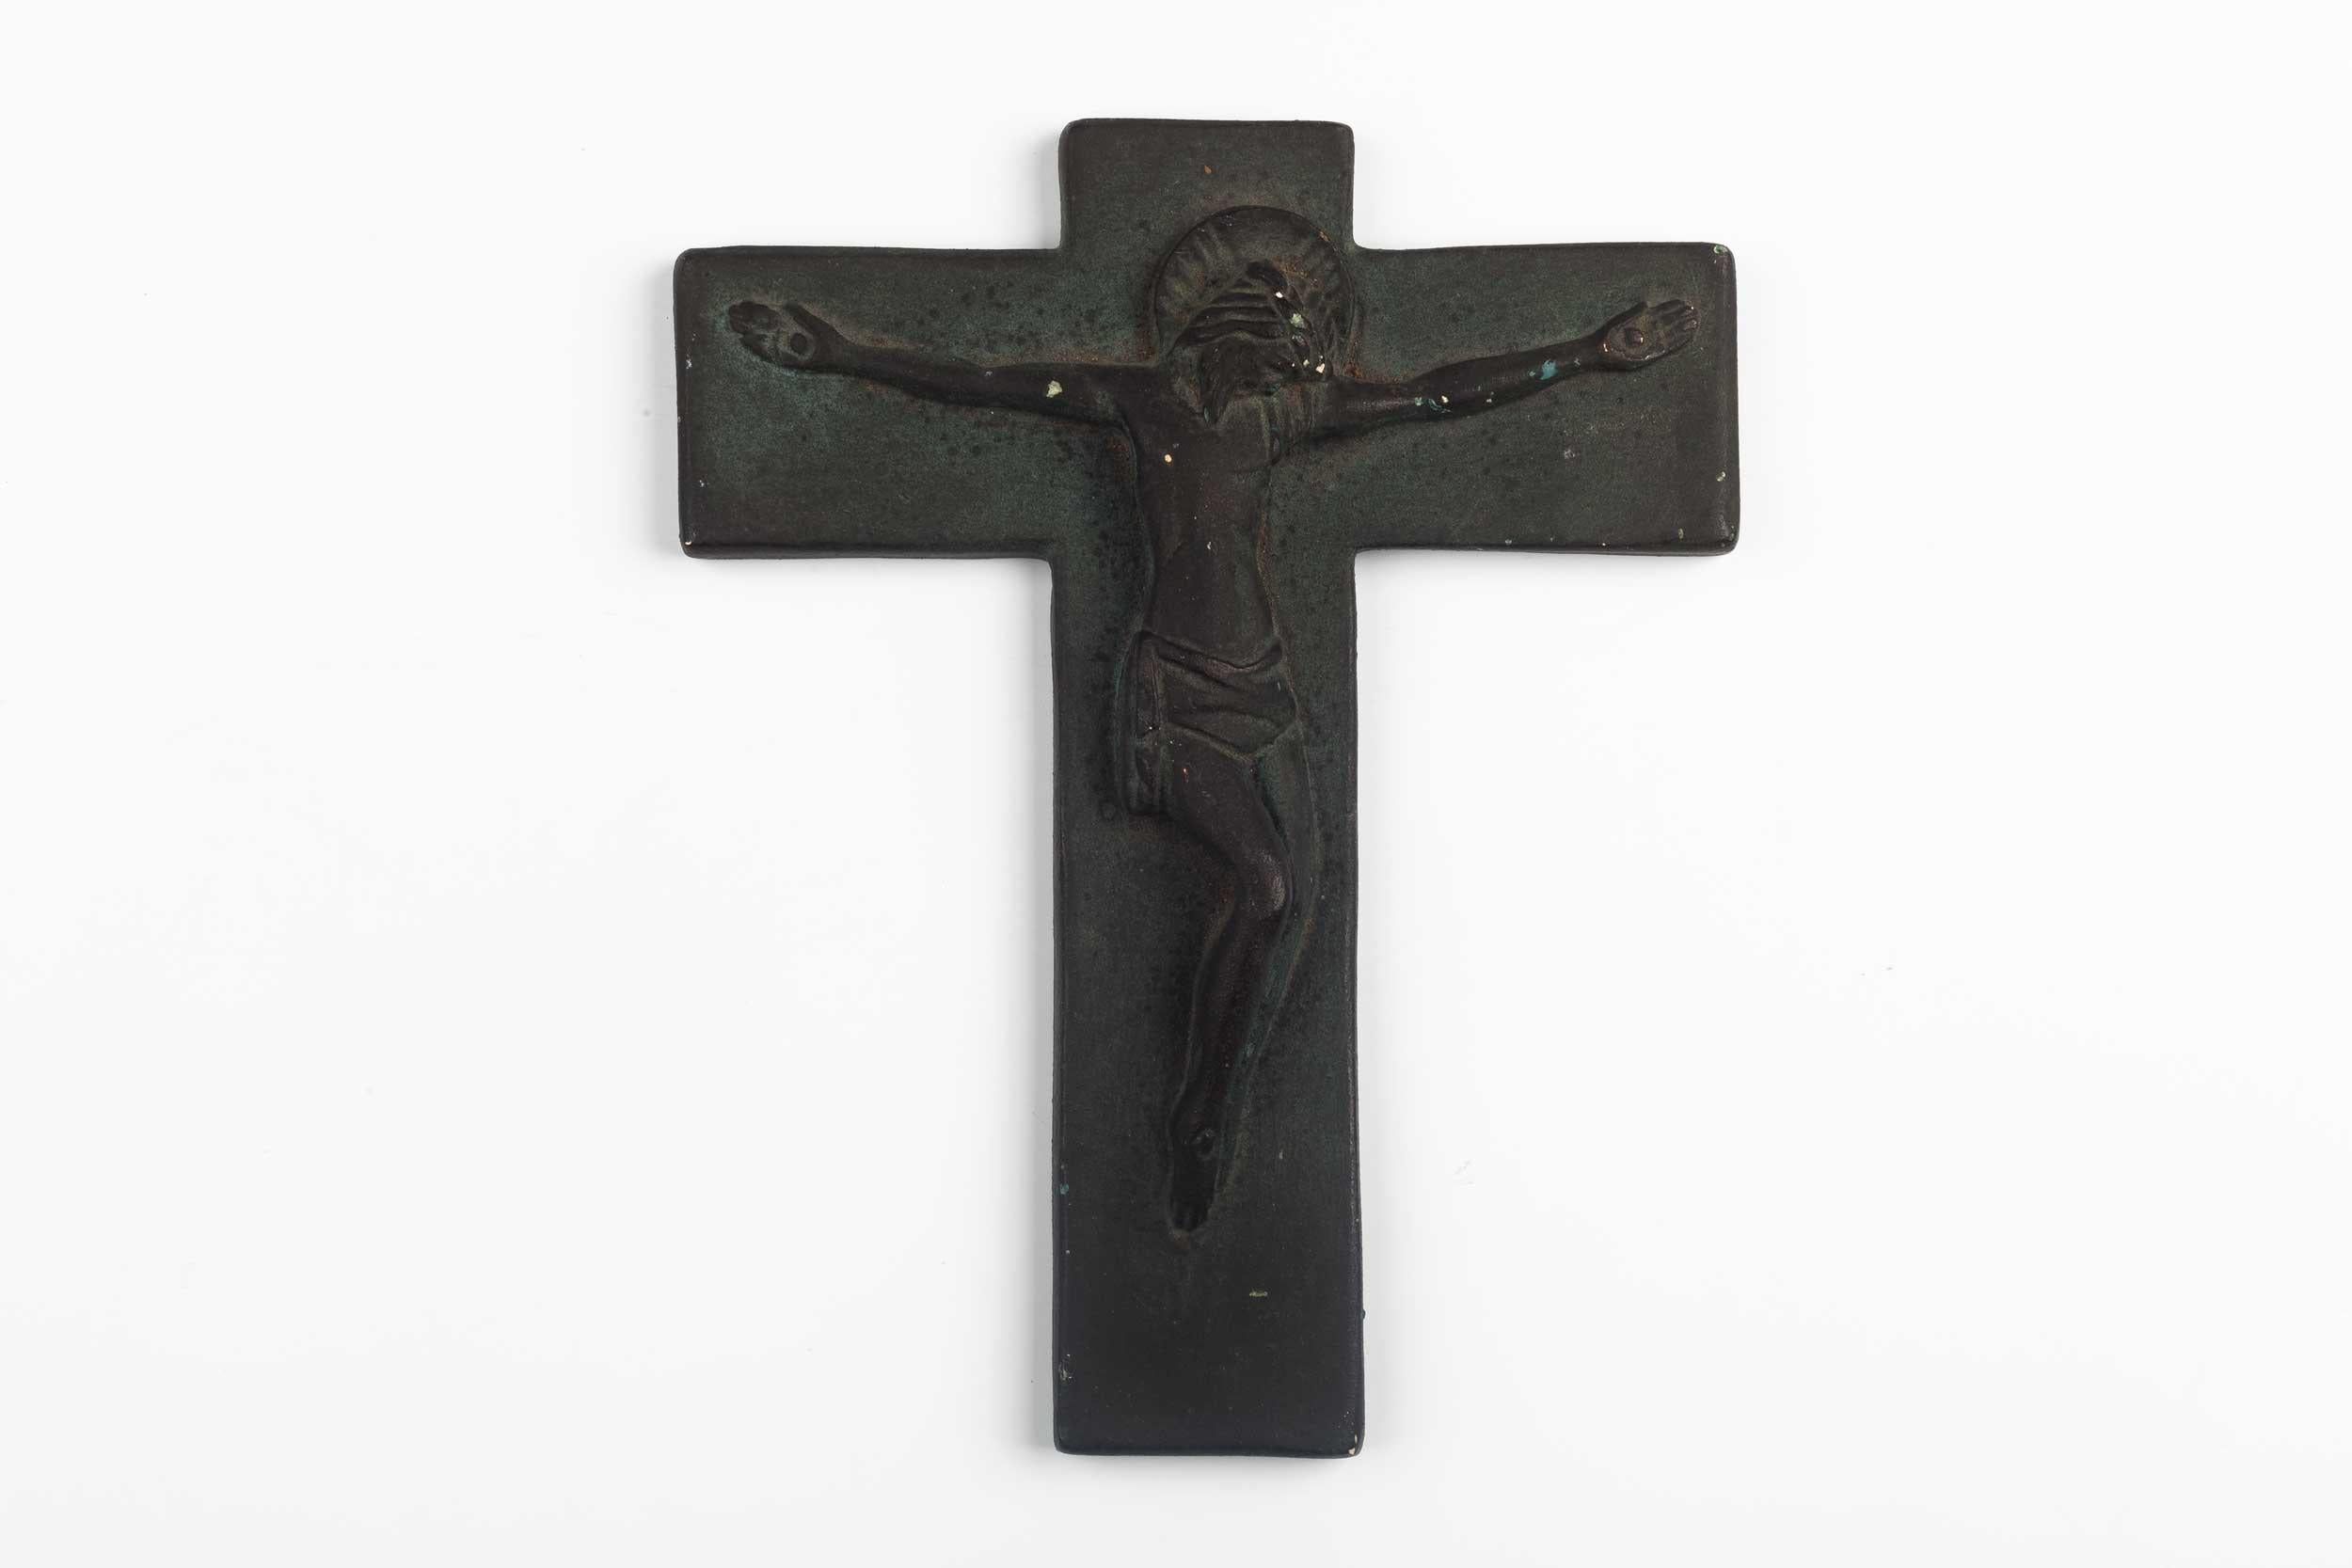 Matte, charcoal colored mid-century European ceramic crucifix with angelic swathed christ figure in volume. Patina small flea bites throughout. A one-of-a-kind, handcrafted piece that is part of a large collection of crosses made by artisan potters